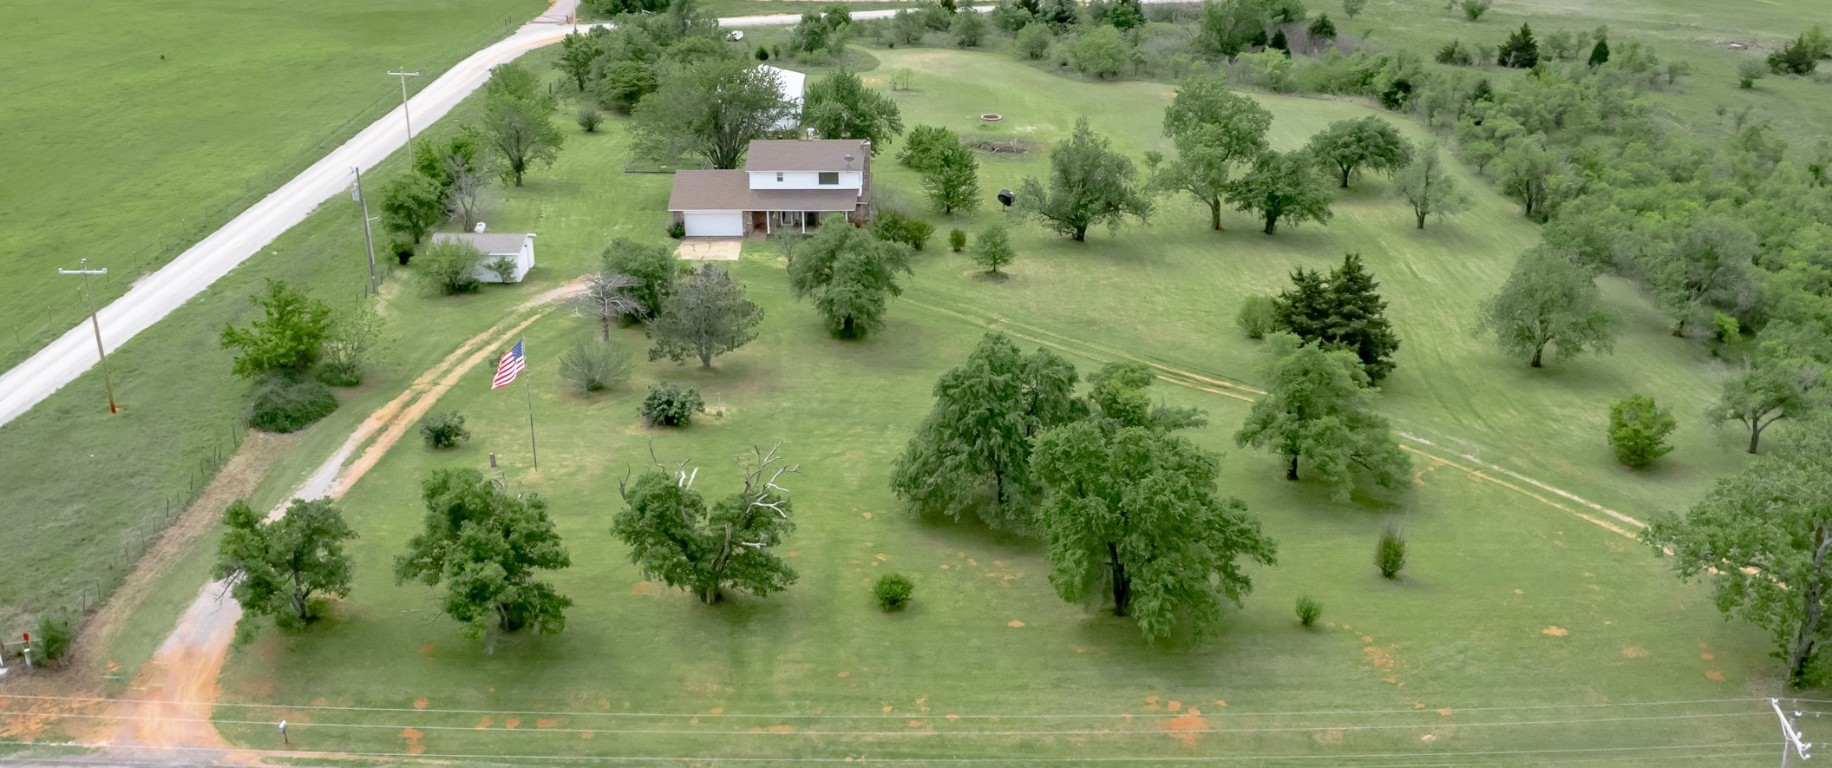 13494 290th Street, Blanchard, OK 73010 drone / aerial view with a rural view